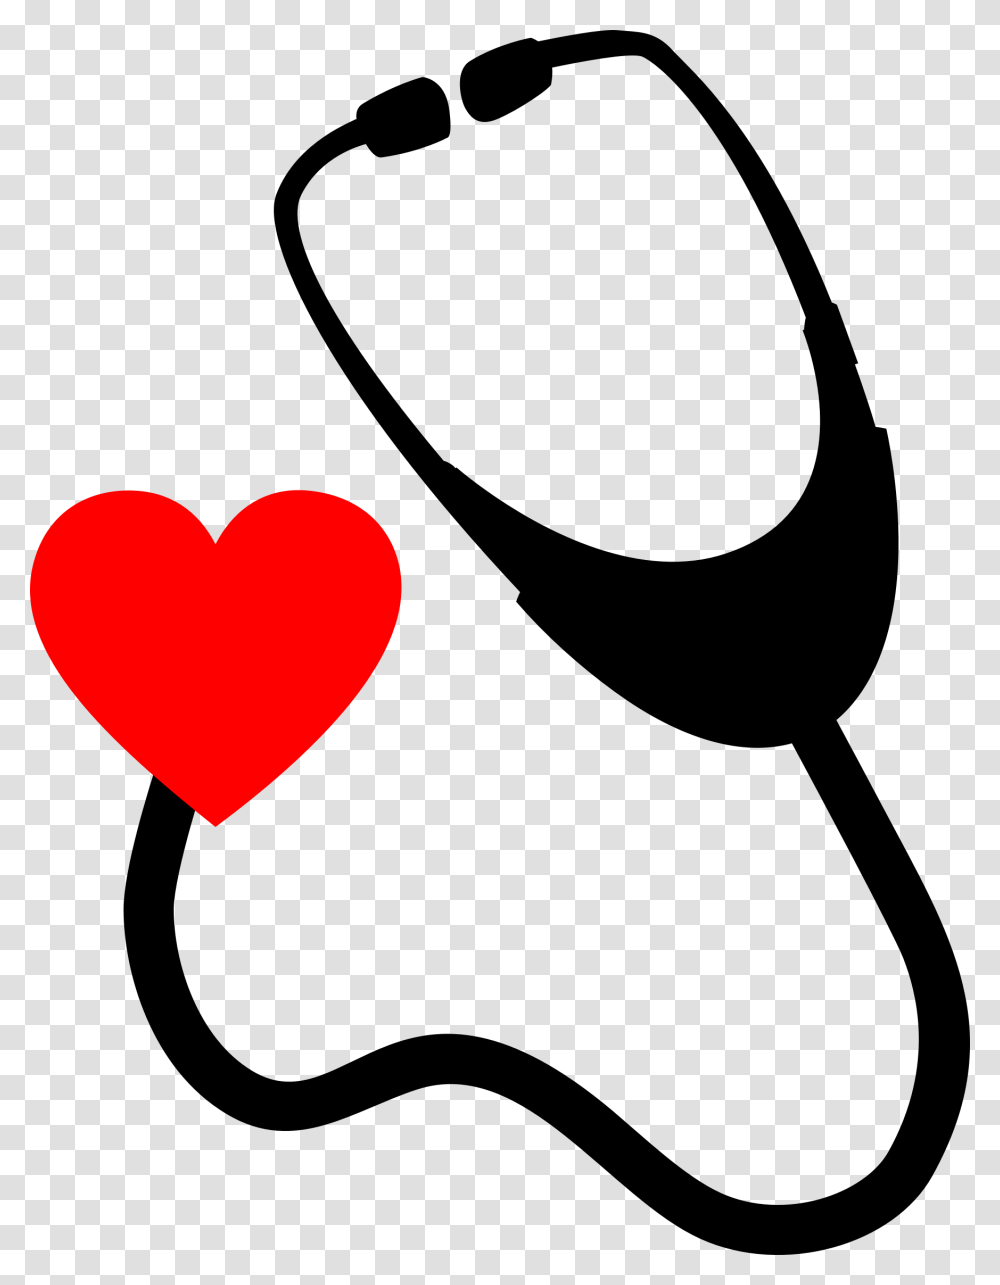 Heart Stethoscope Icons Transparent Png